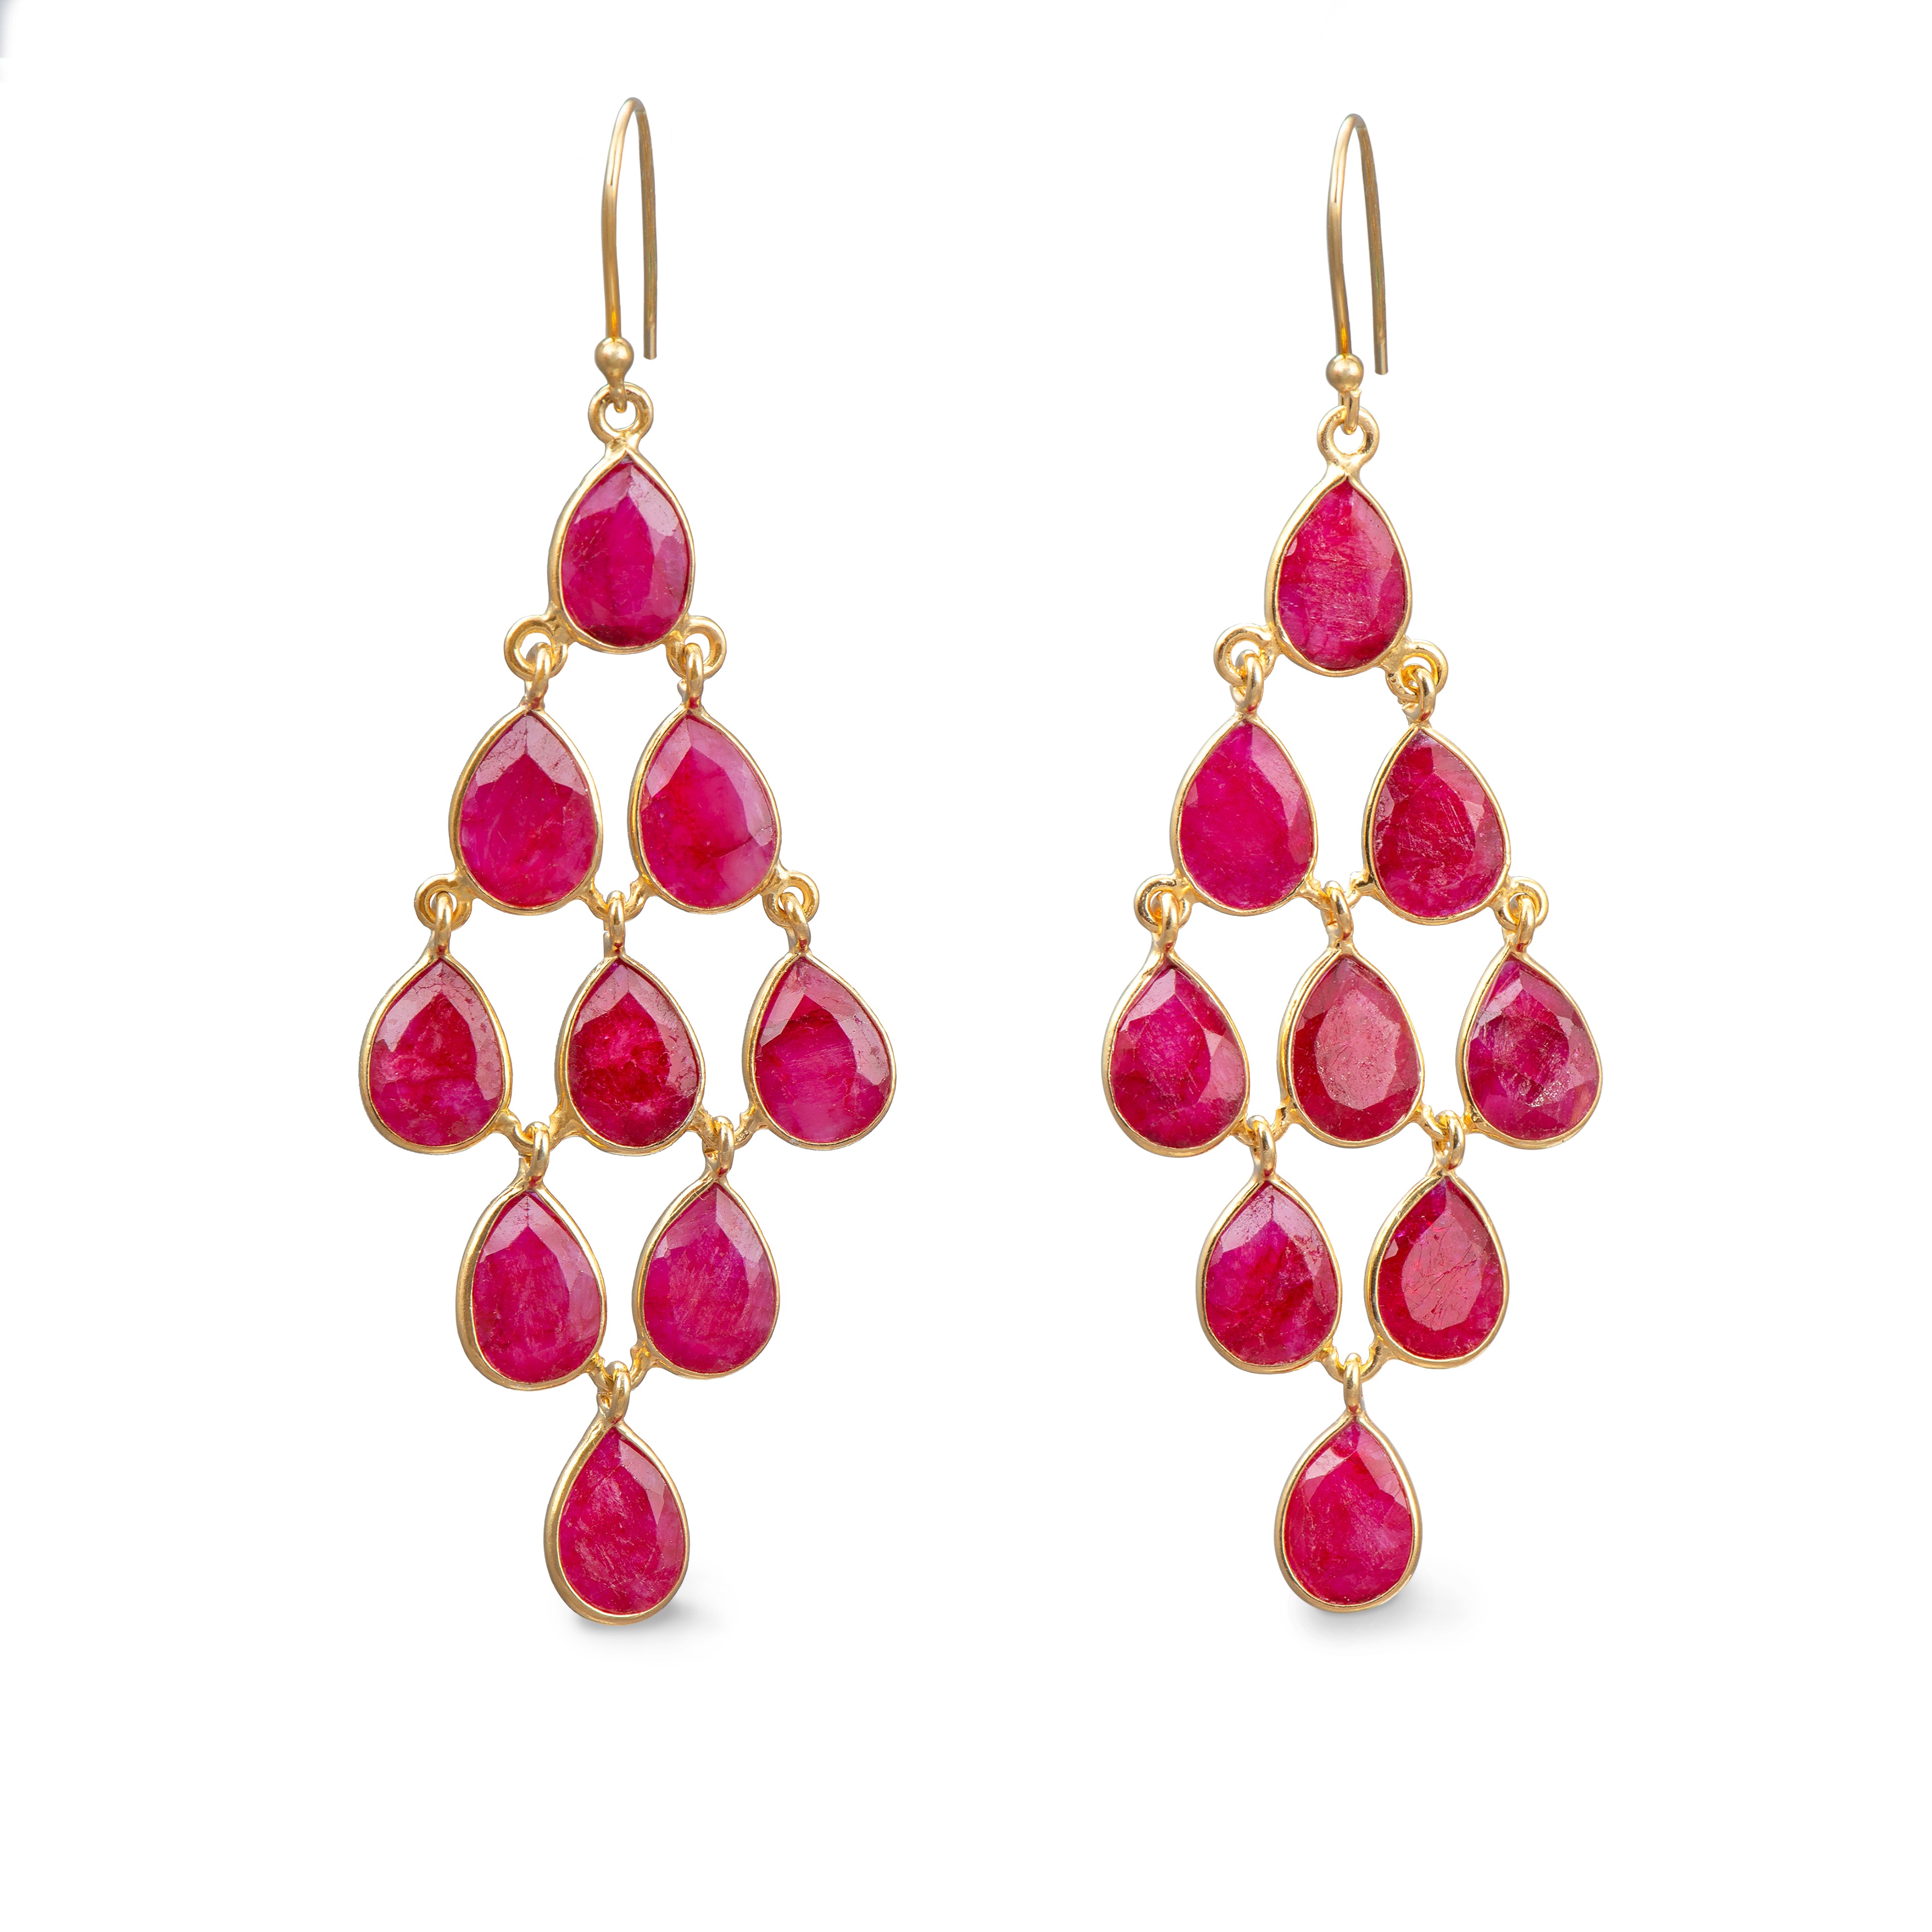 Gold Plated Sterling Silver Chandelier Earrings with Natural Gemstones - Ruby Quartz